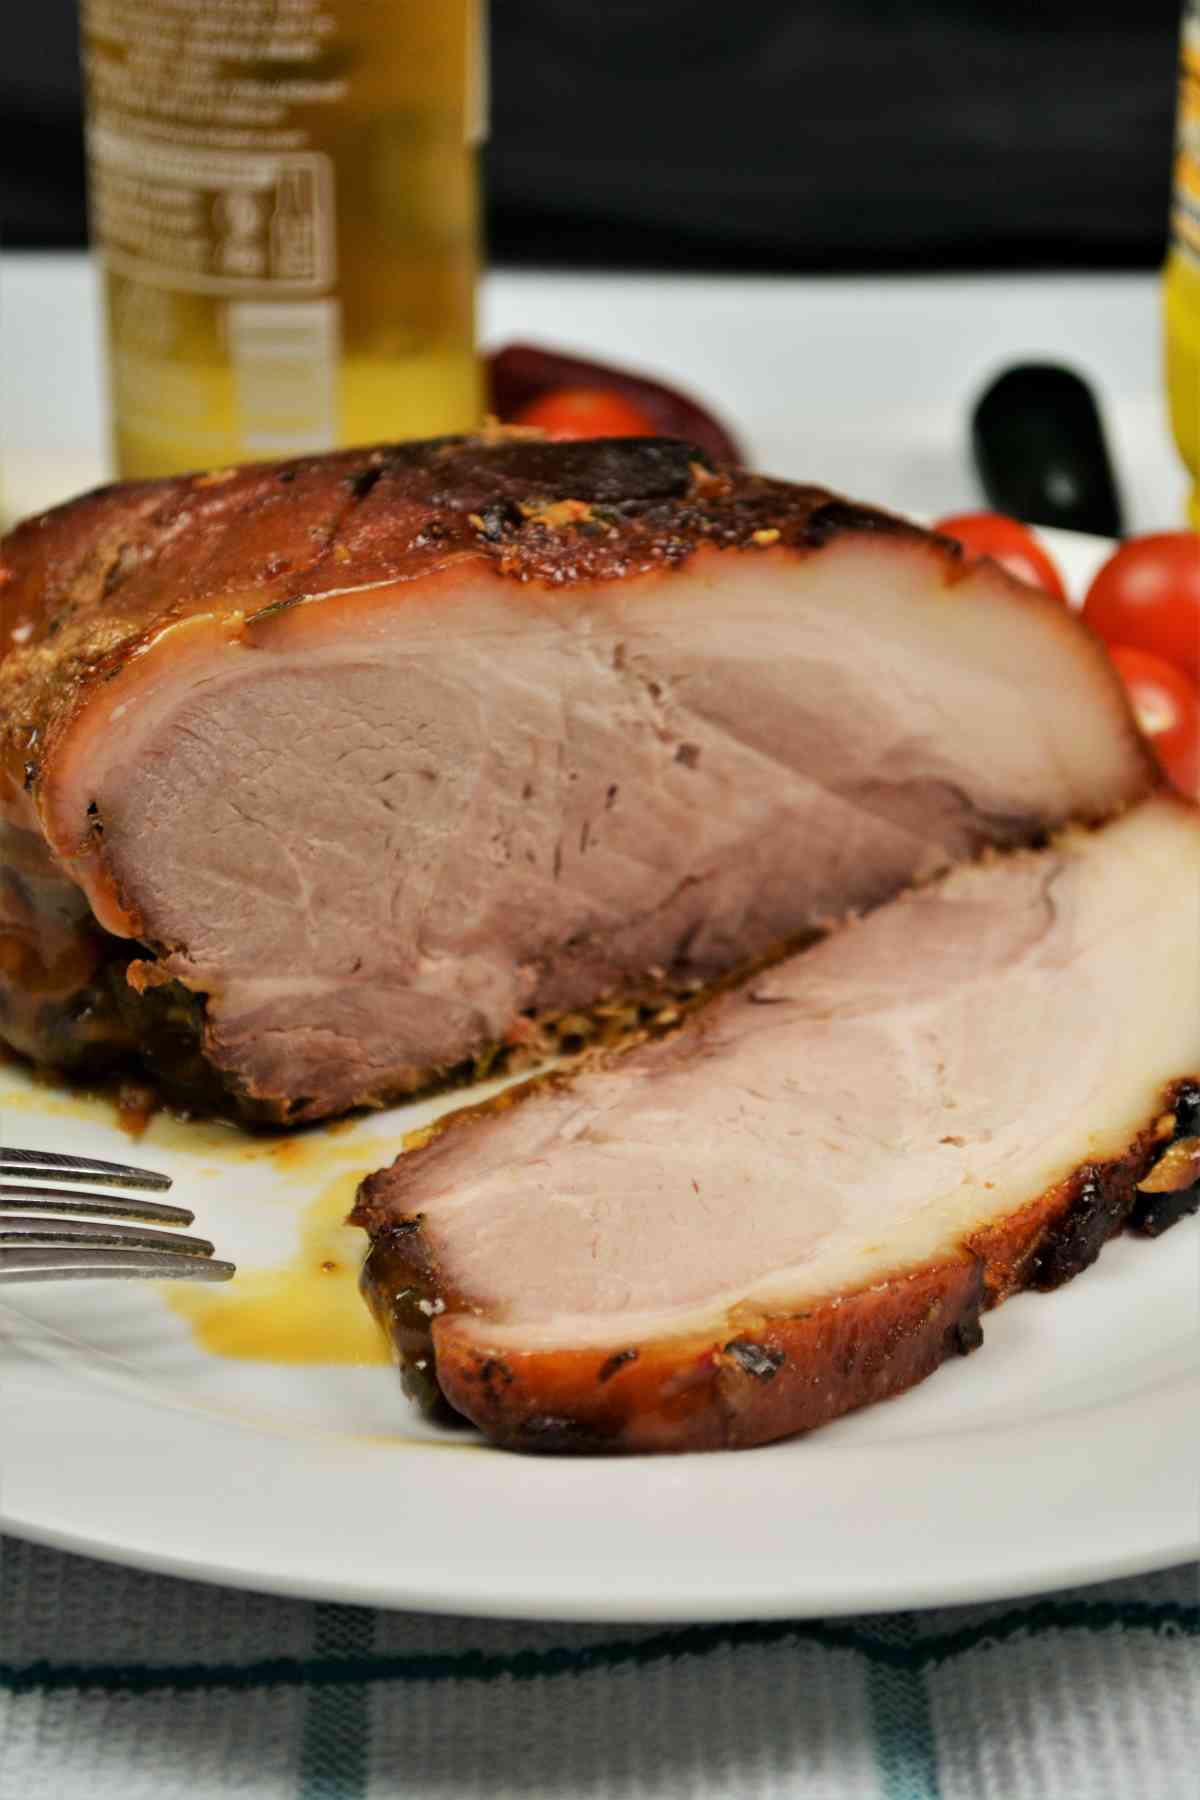 Slow-Cooked Pork Shoulder in the Oven-Sliced and Served on Plate With Mustard and Bread